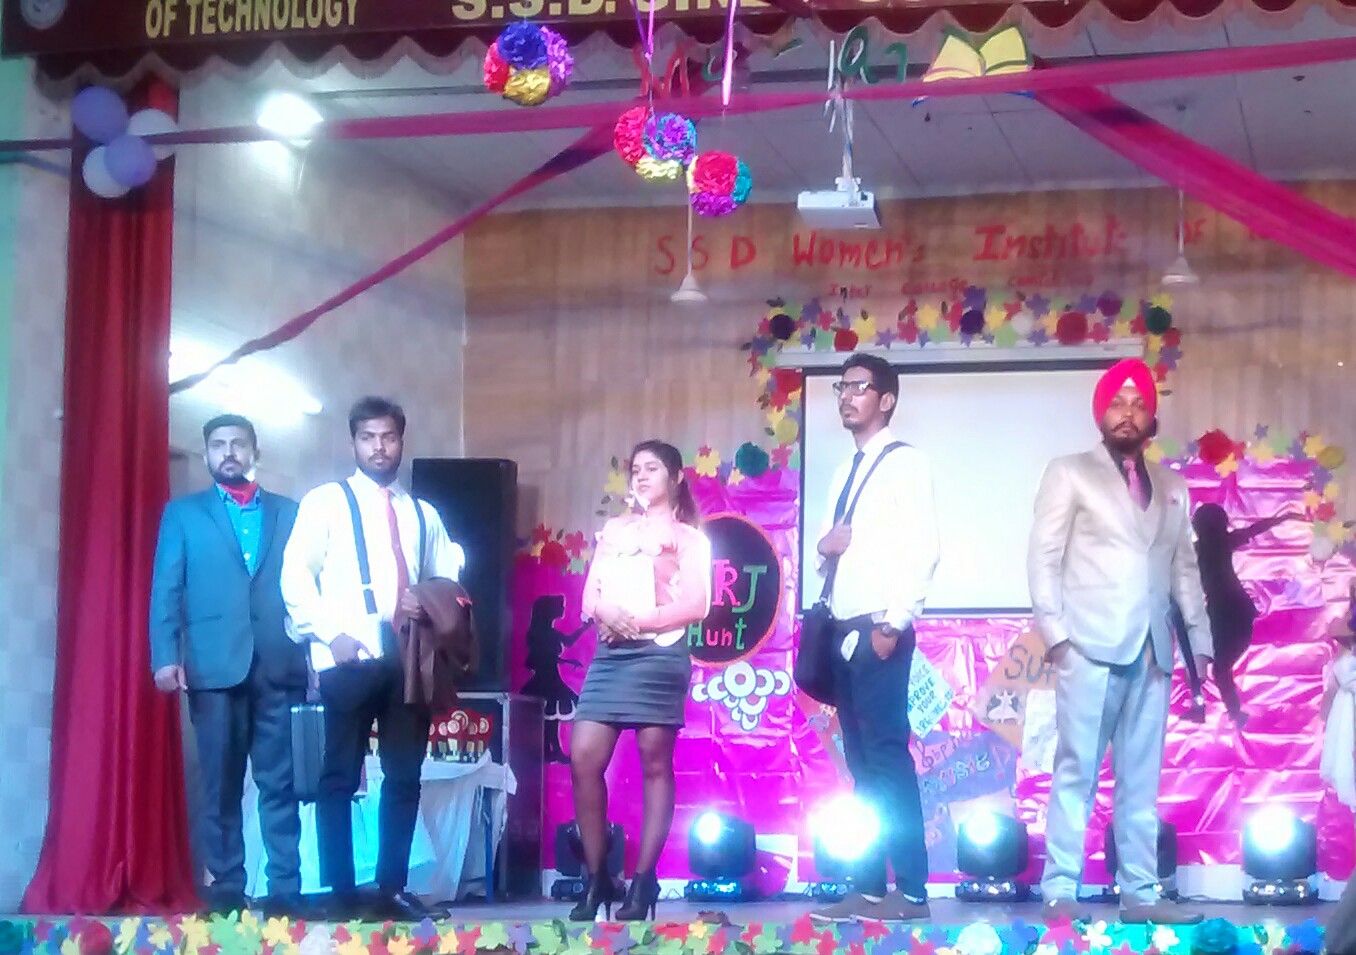 Participation in a cultural fest MANTHANâ€™16 held at SSD Womenâ€™s Institute of Technology